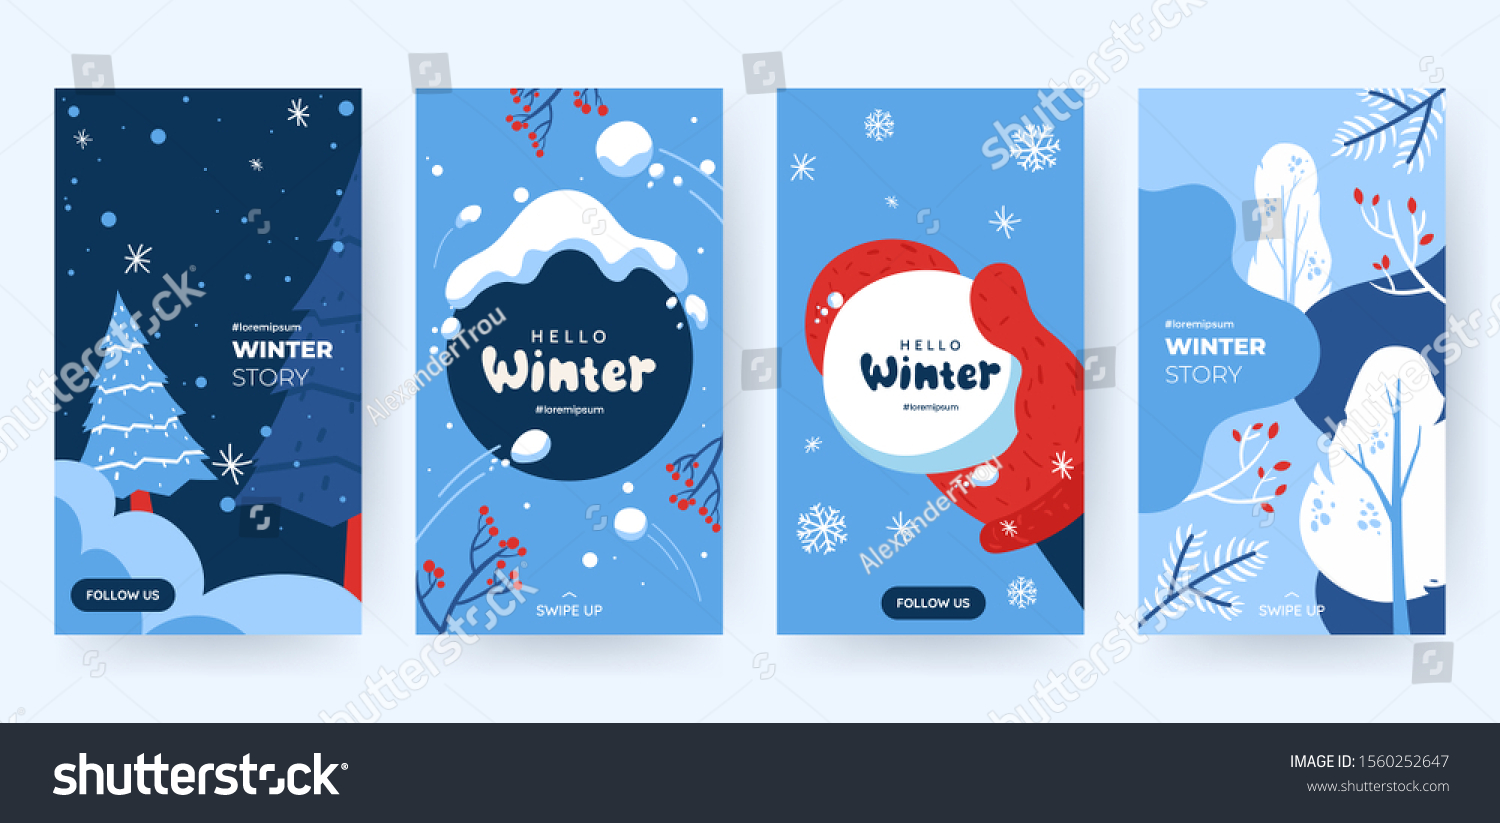 Set of abstract winter backgrounds for social media stories. Colorful winter banners with falling snowflakes, snowy trees. Wintry scenes . Use for event invitation, discount voucher, ad. Vector eps 10 #1560252647